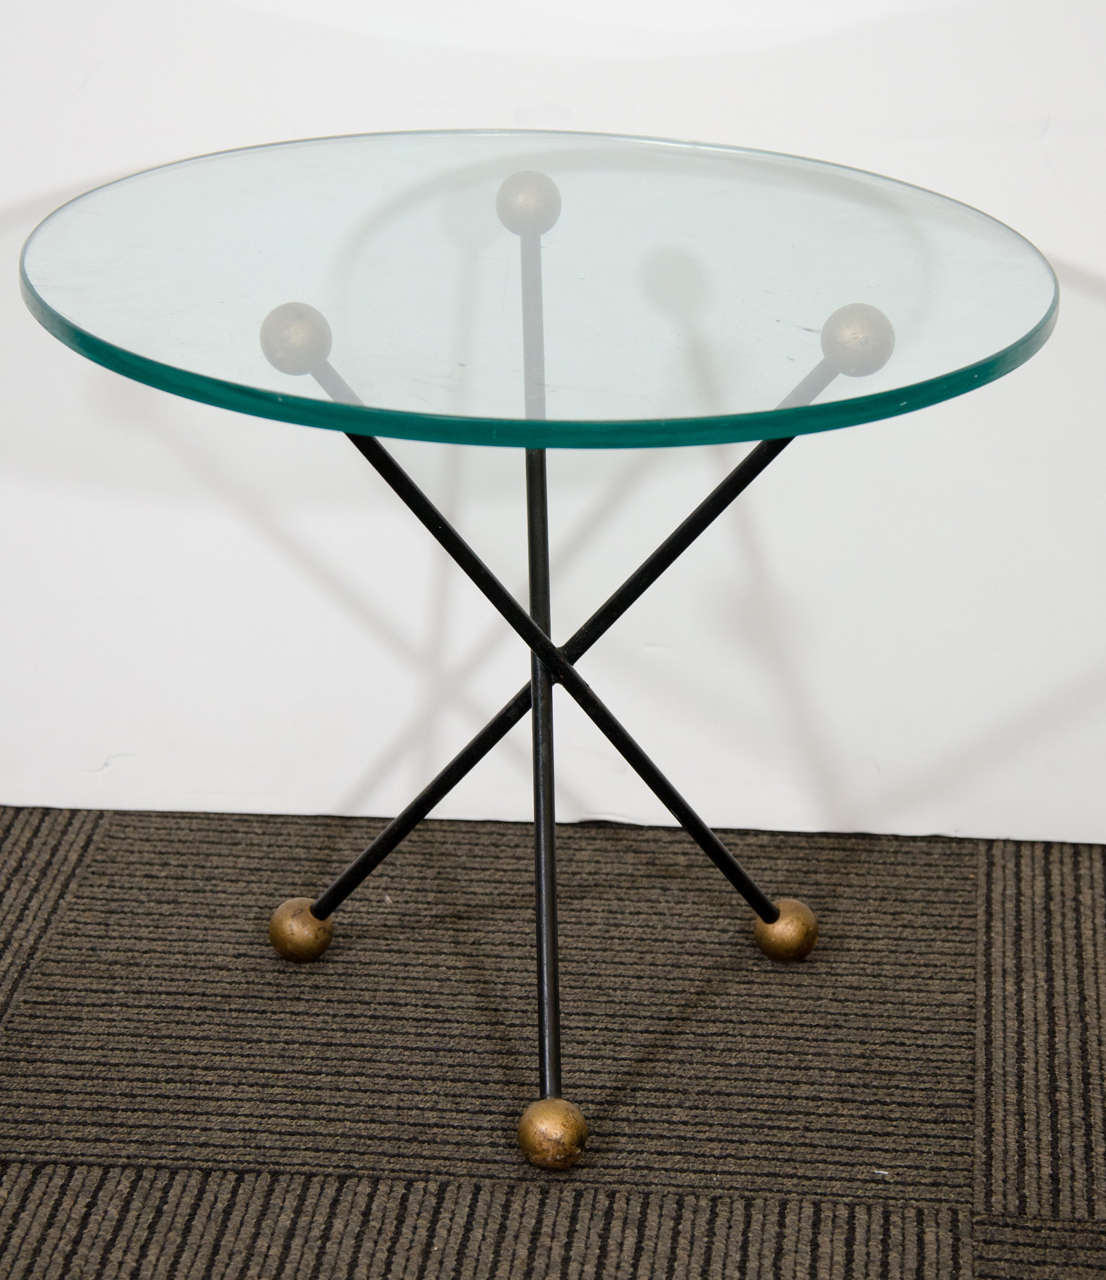 A vintage pair of end or side tables with glass tops and steel bases in the shape of Jacks by Tony Paul.